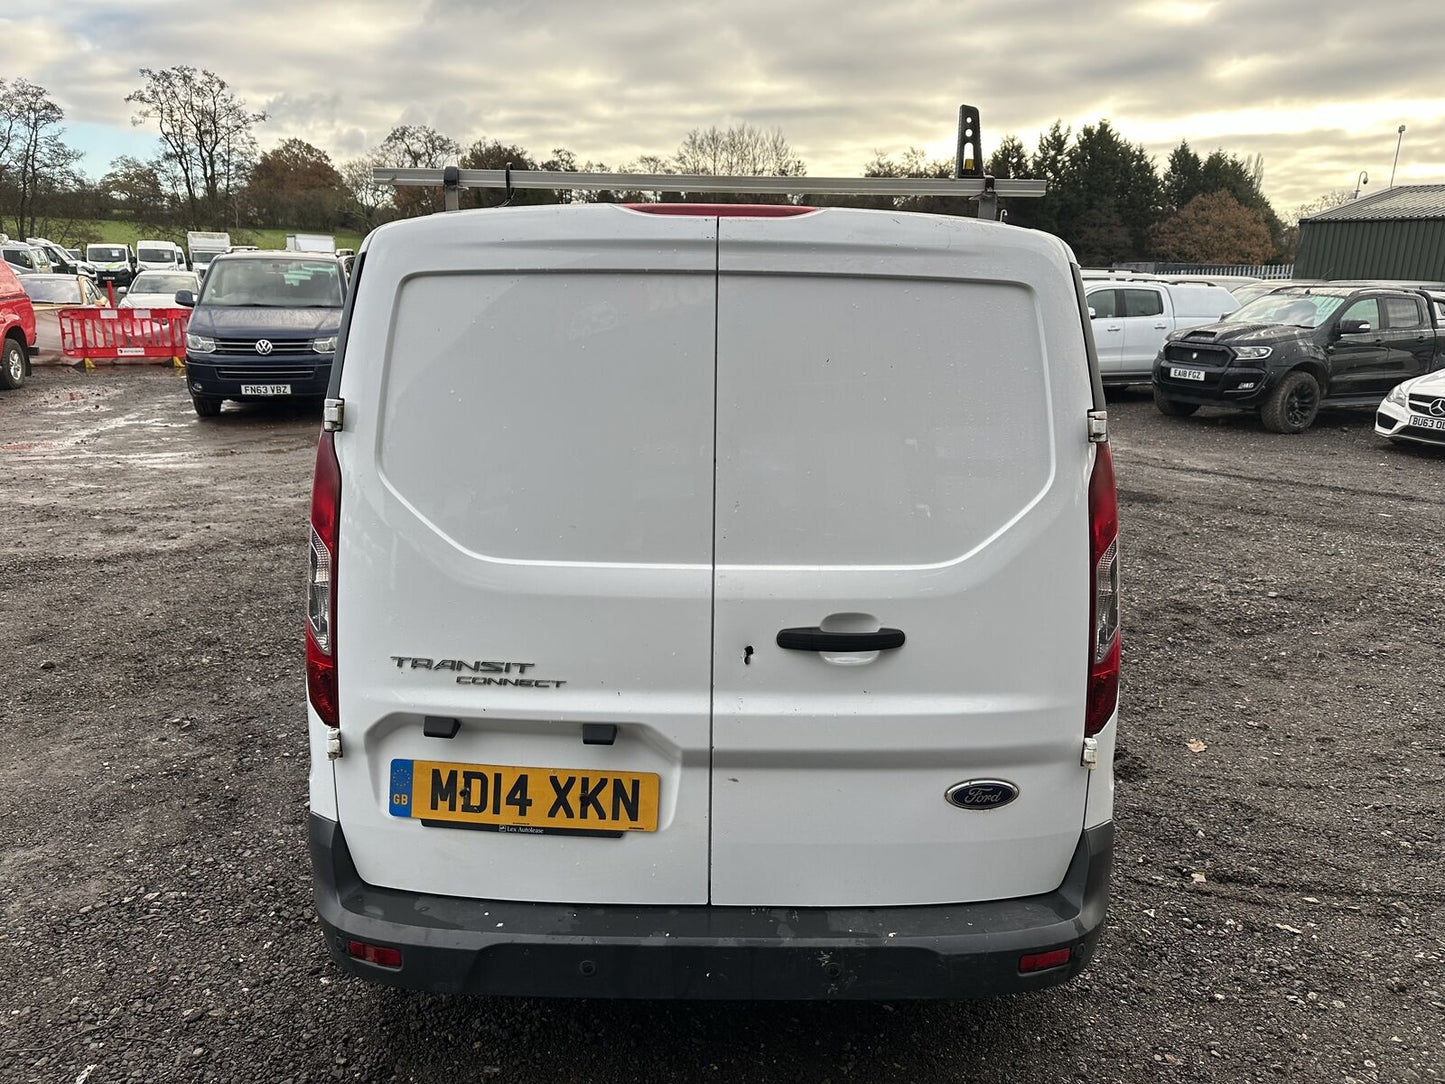 Bid on RELIABLE WORKHORSE: 2014 FORD TRANSIT CONNECT DIESEL VAN - NO VAT ON HAMMER- Buy &amp; Sell on Auction with EAMA Group